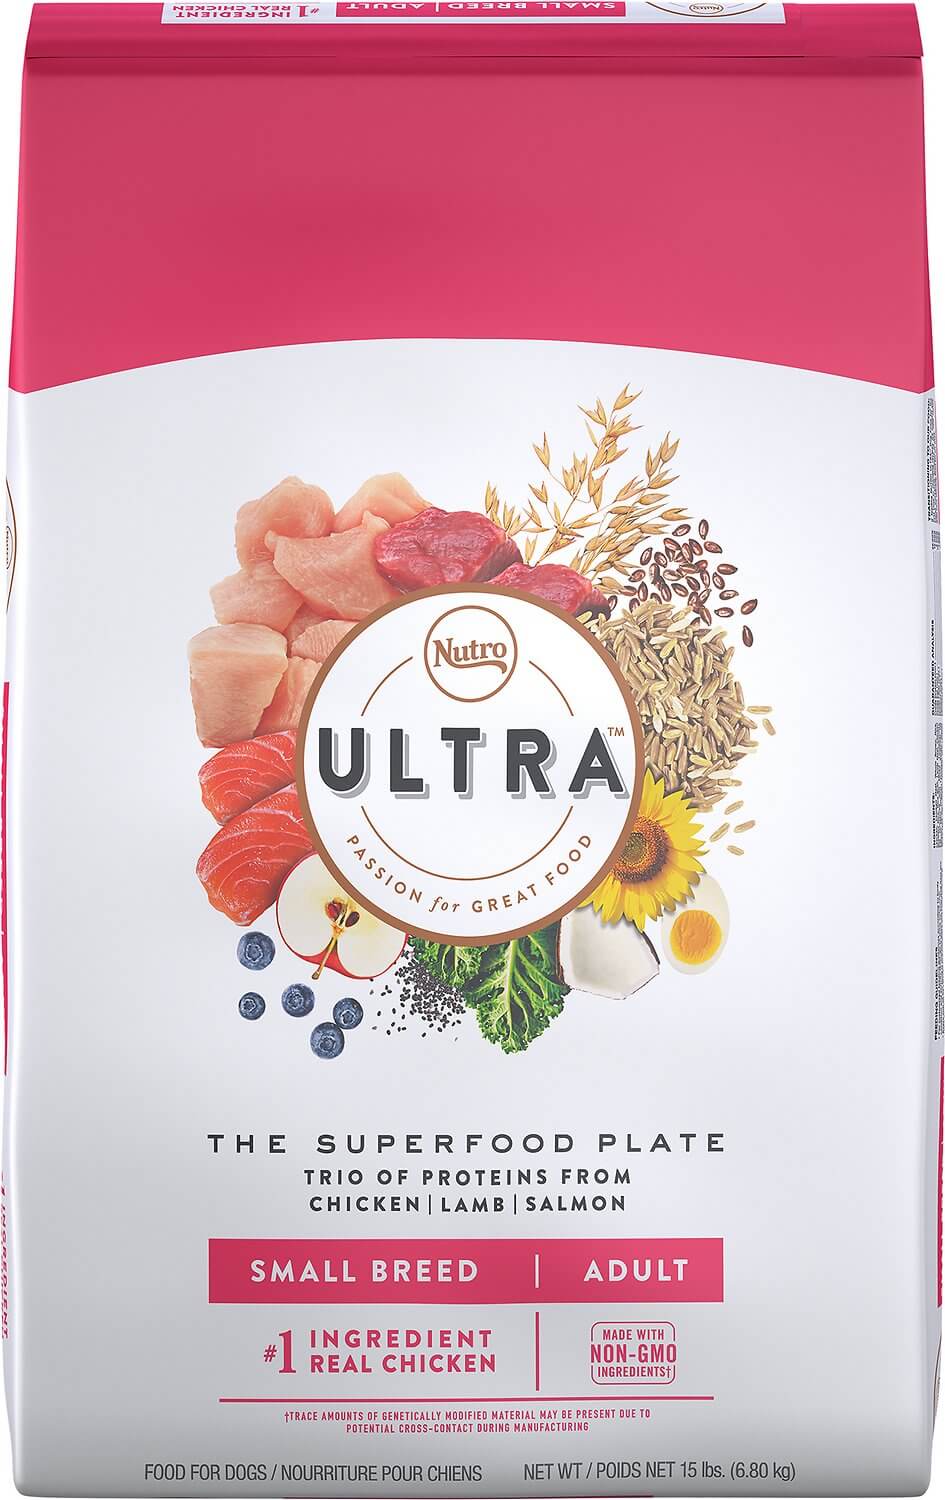 Nutro Ultra - Best Dog Food with Grain